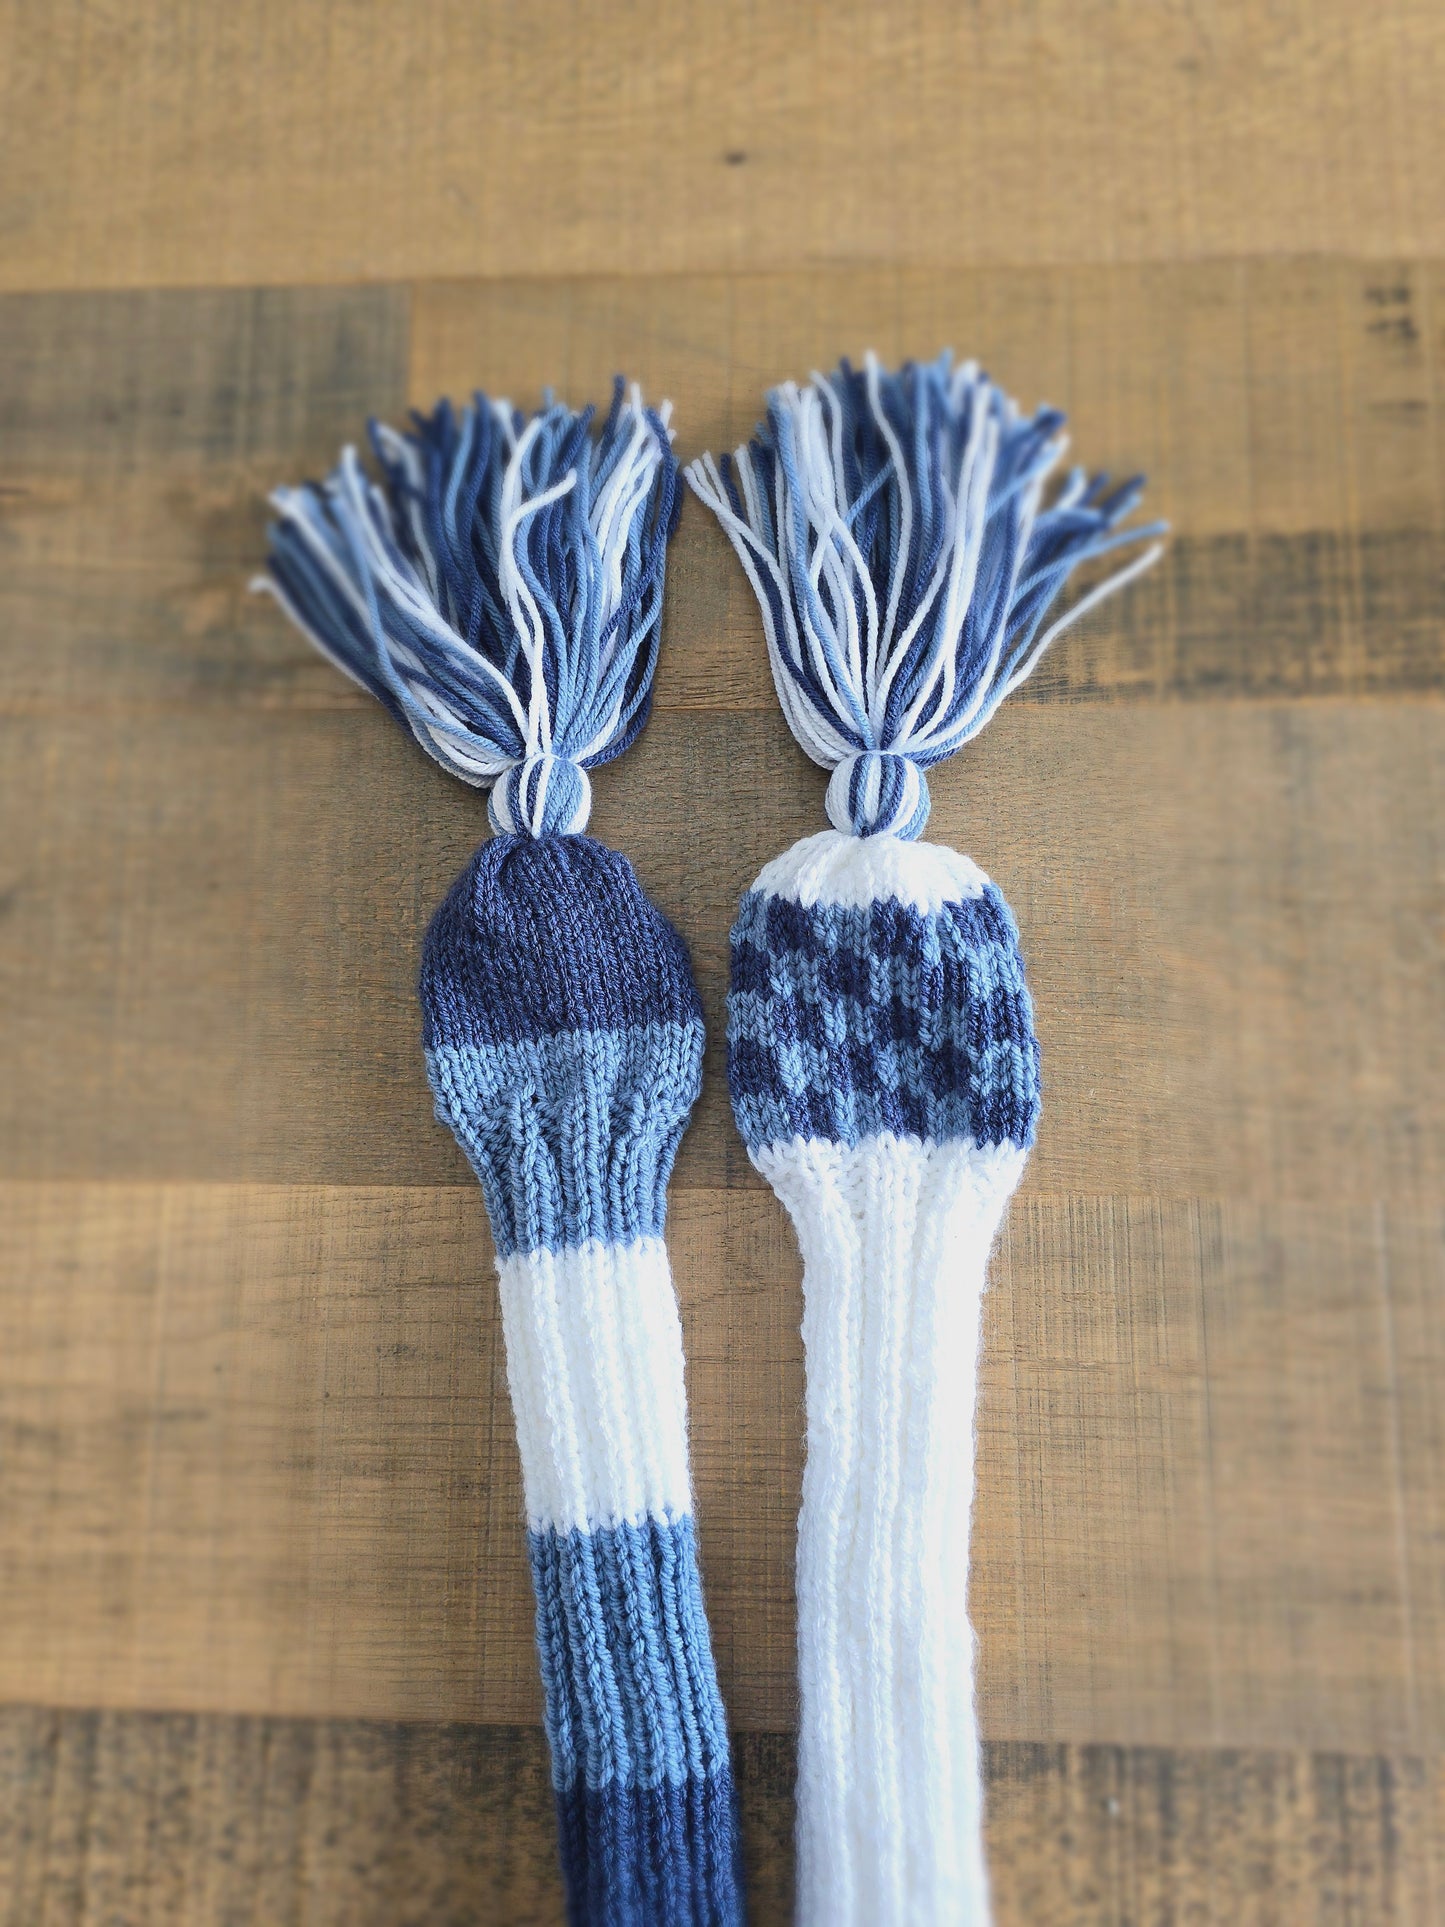 Two Golf Club Head Covers Retro-Vintage Blue & White with Tassels for Fairway Woods